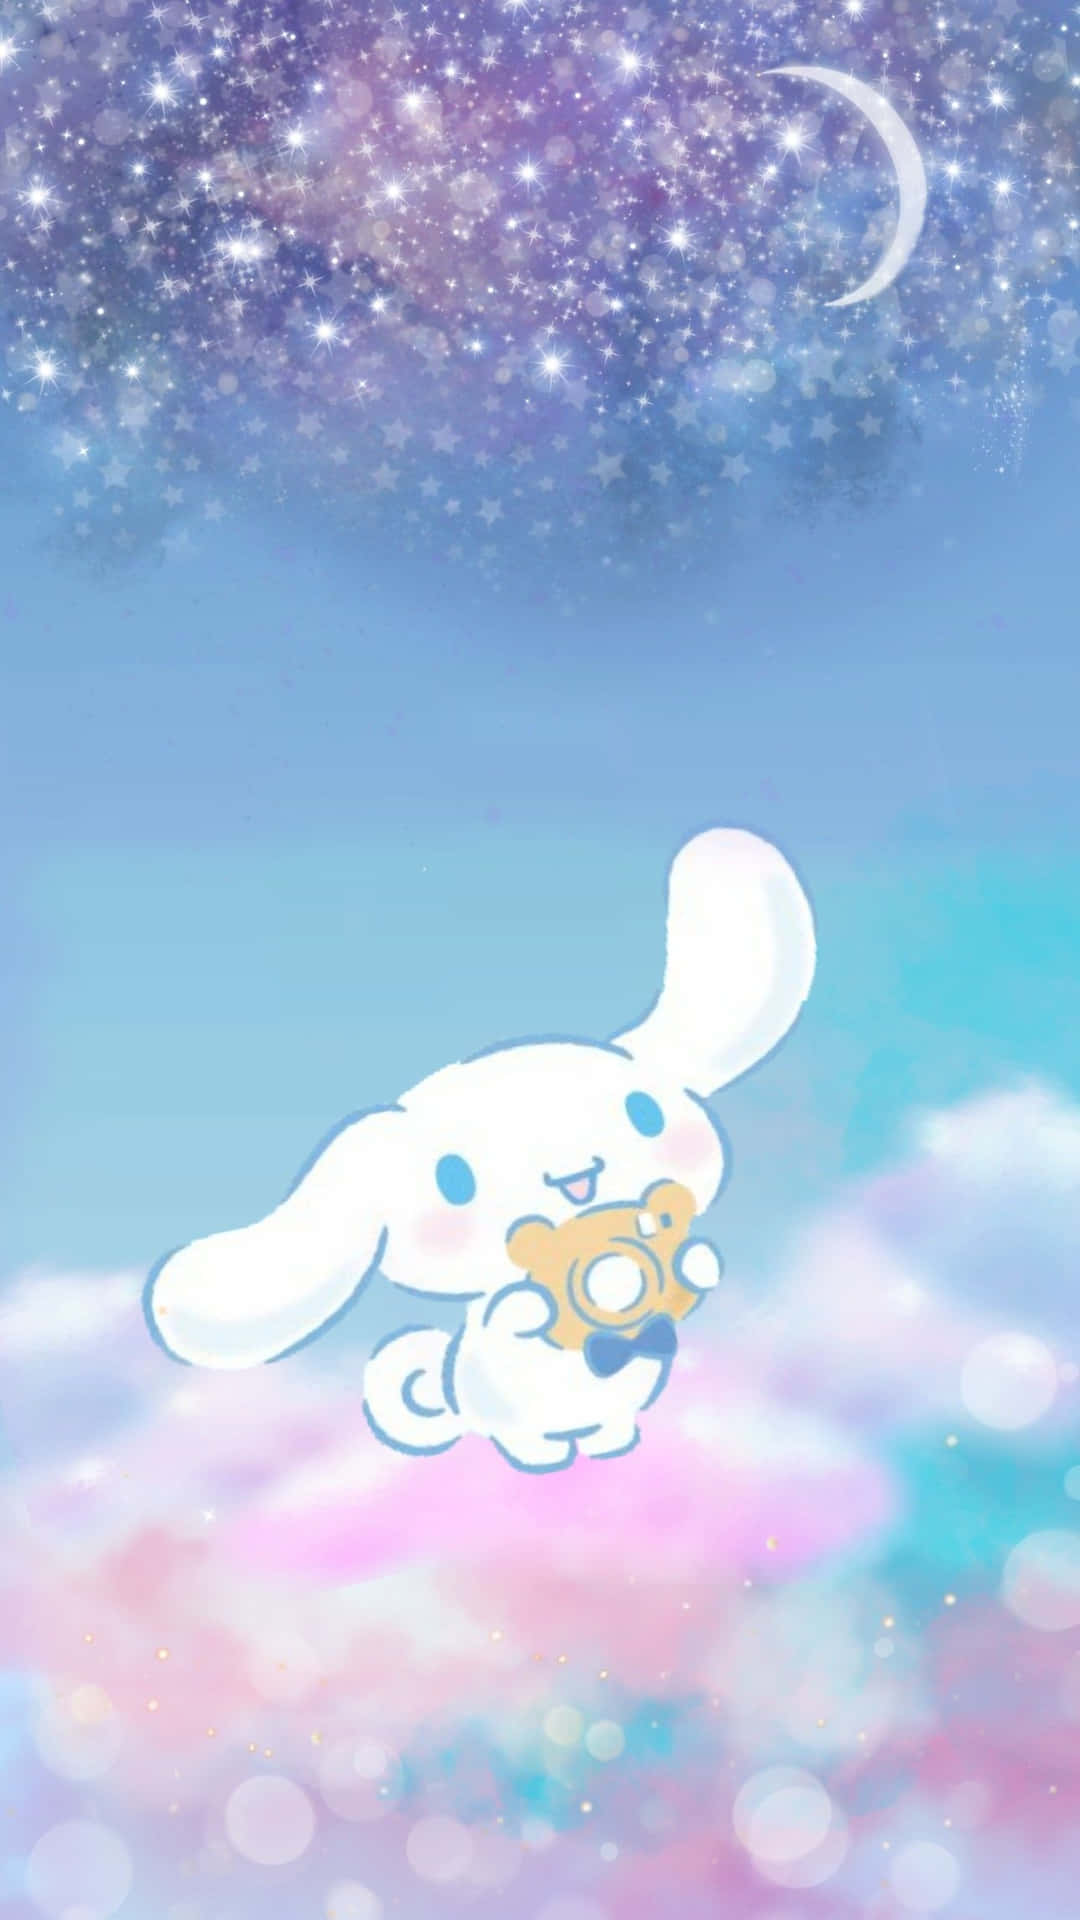 A White Dog With A Teddy Bear In The Sky Wallpaper